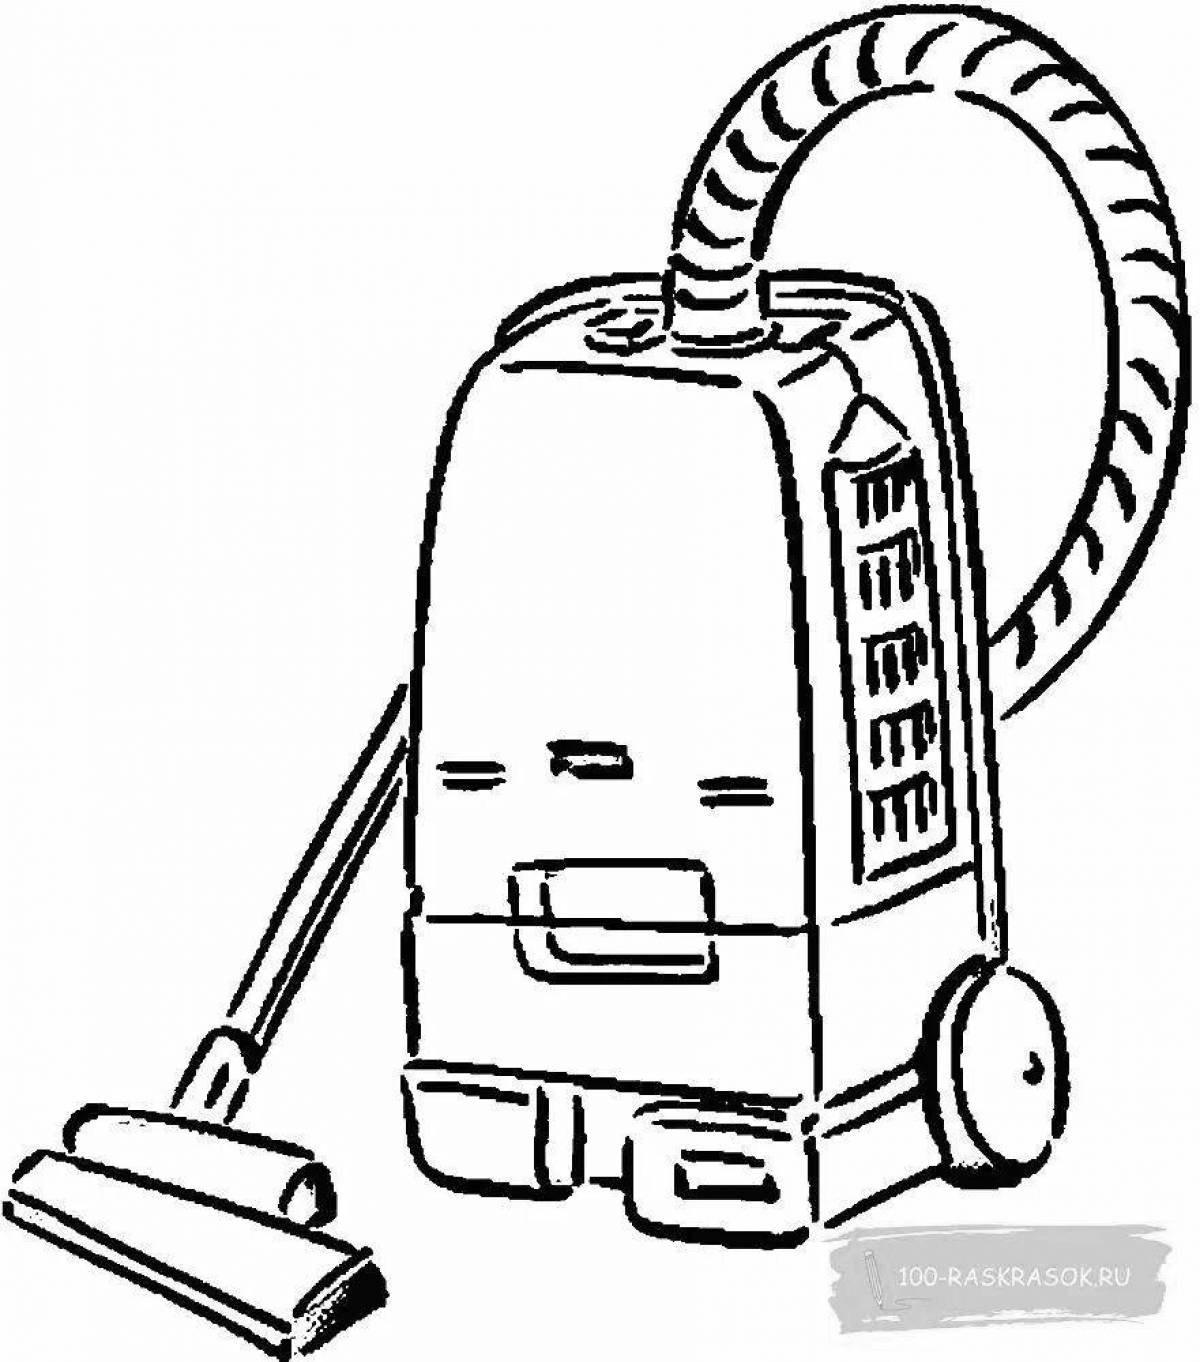 Colorful preschool vacuum cleaner coloring page